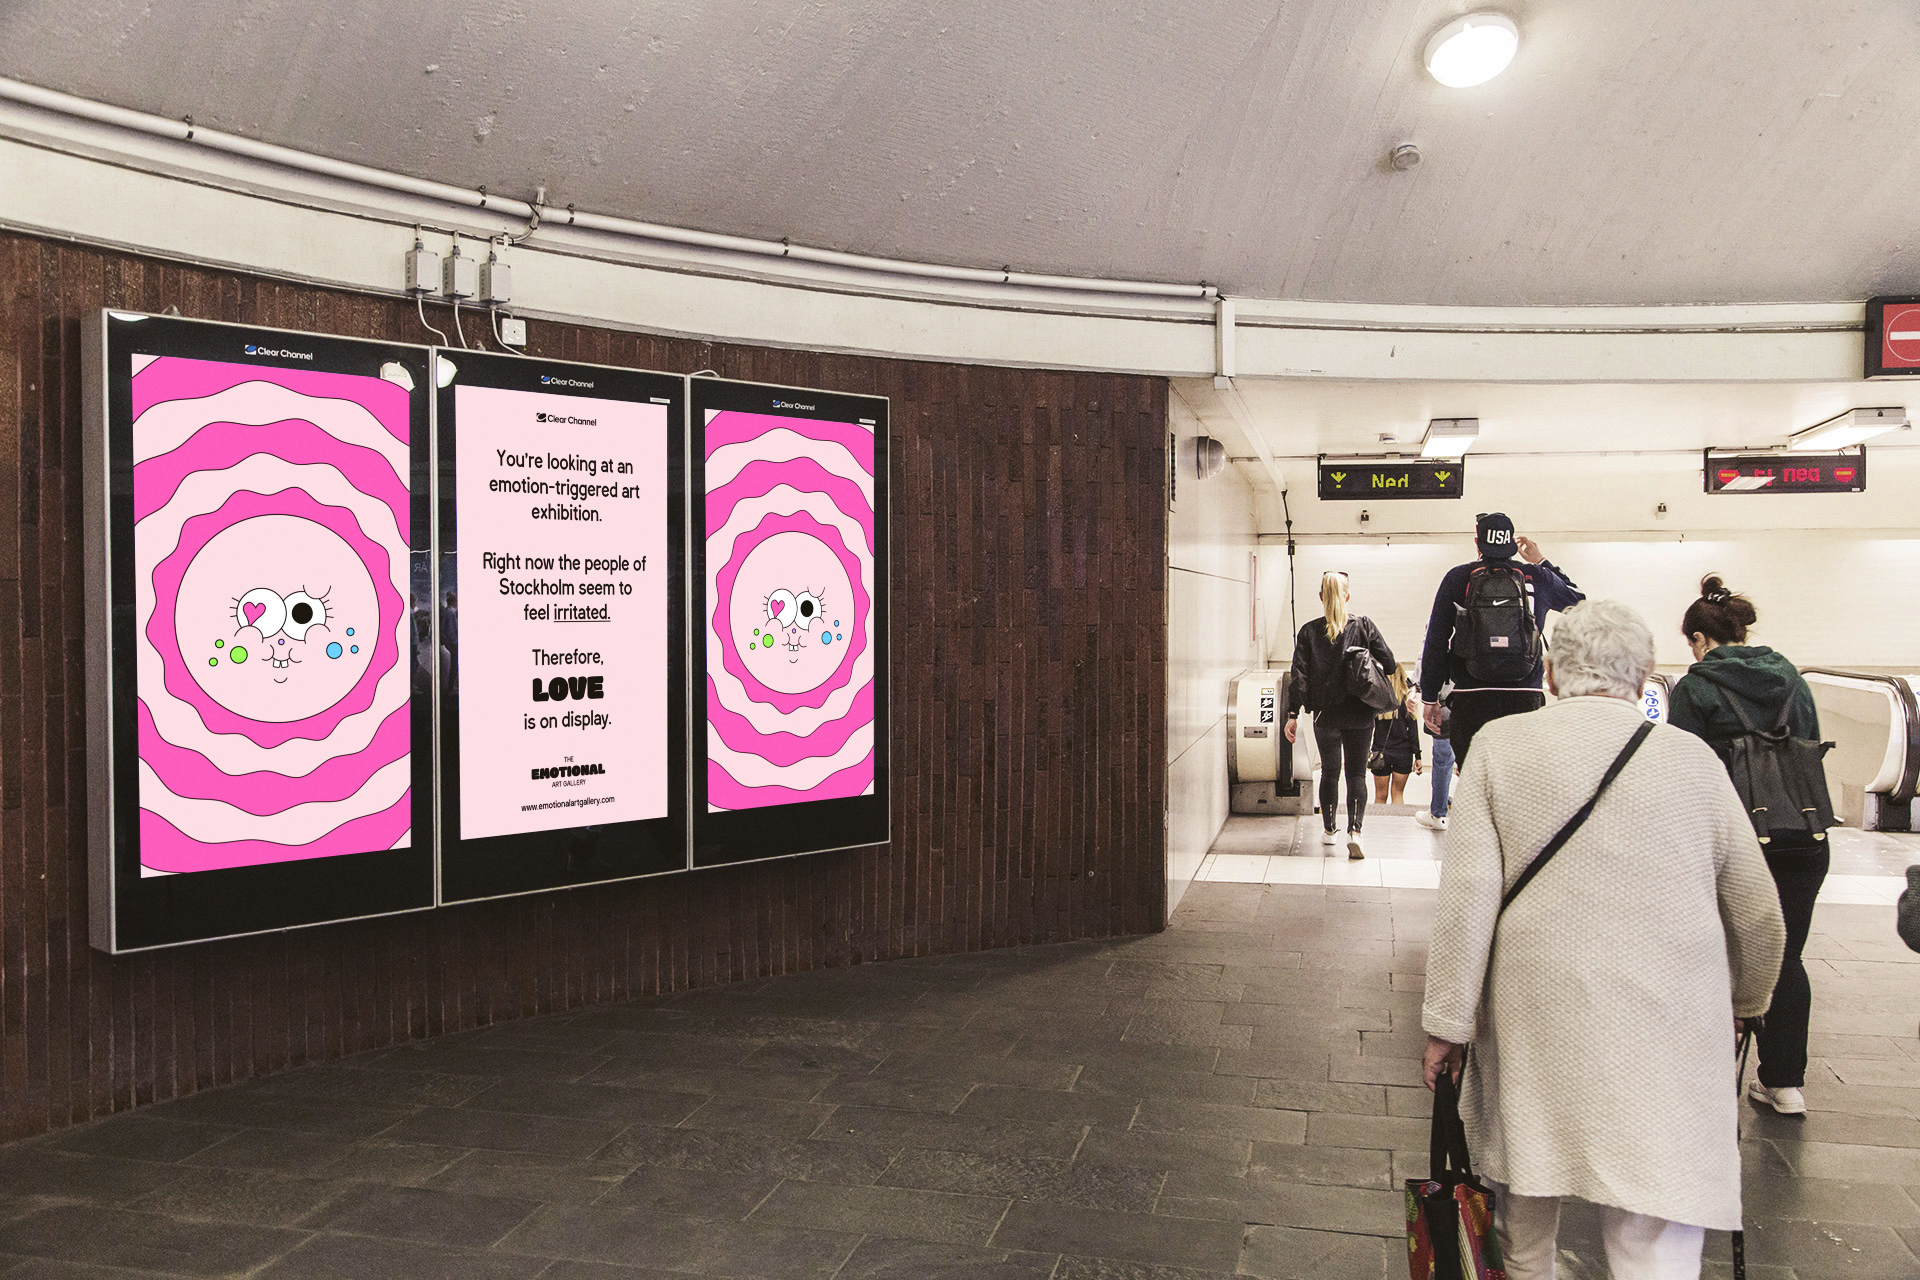 Stockholm’s Metro Transforms into Digital Art Gallery to Combat Commuter Stress